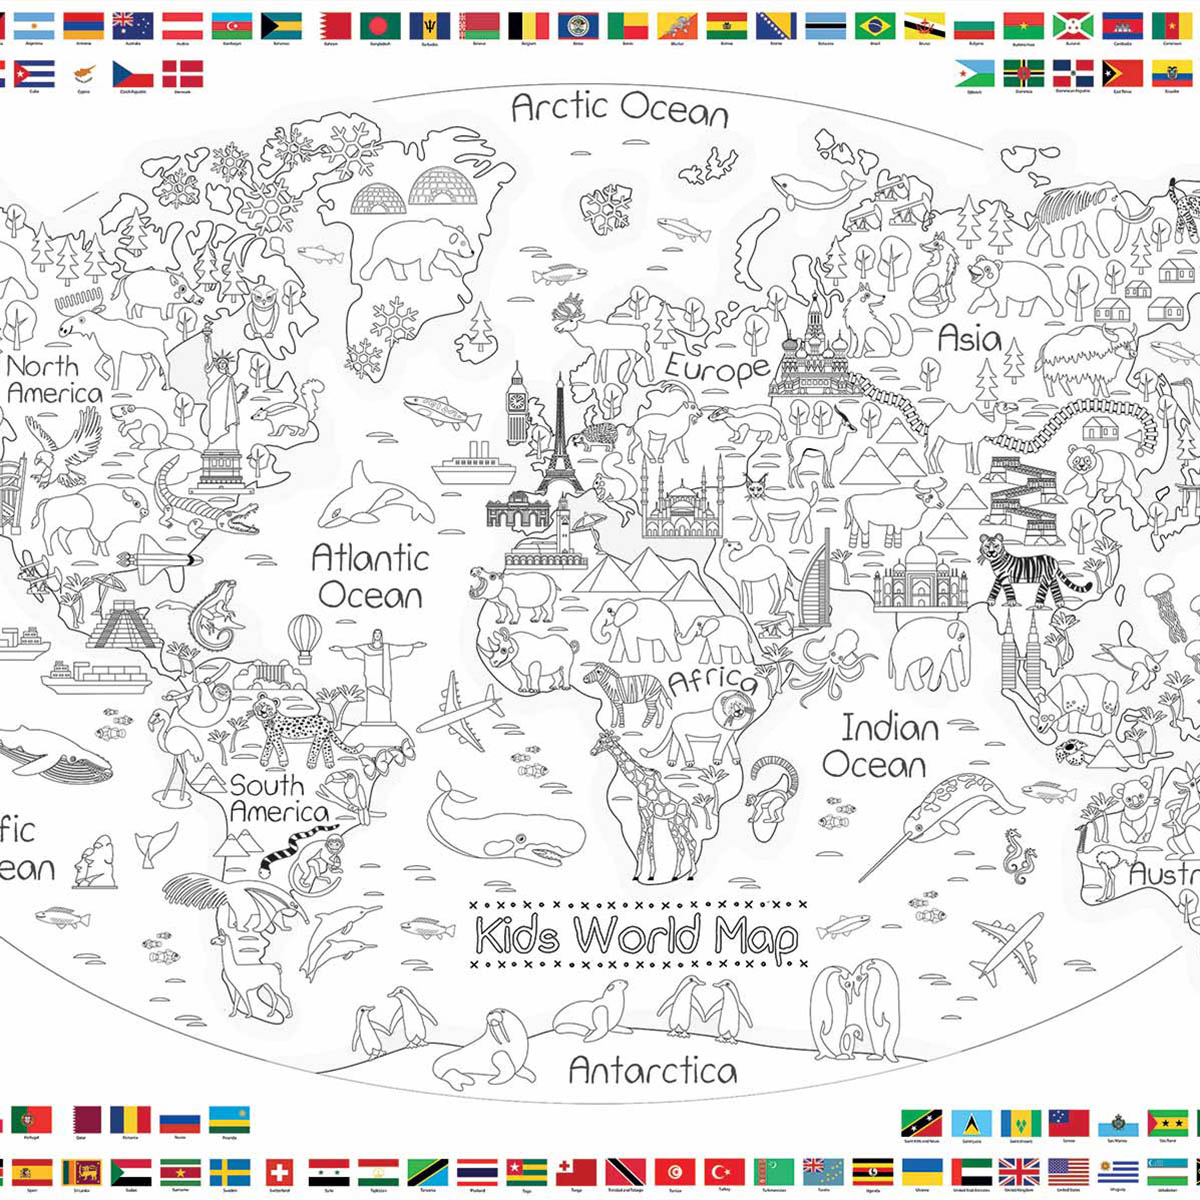 World Map Poster, Coloring Travel Map of the World, Adult Coloring